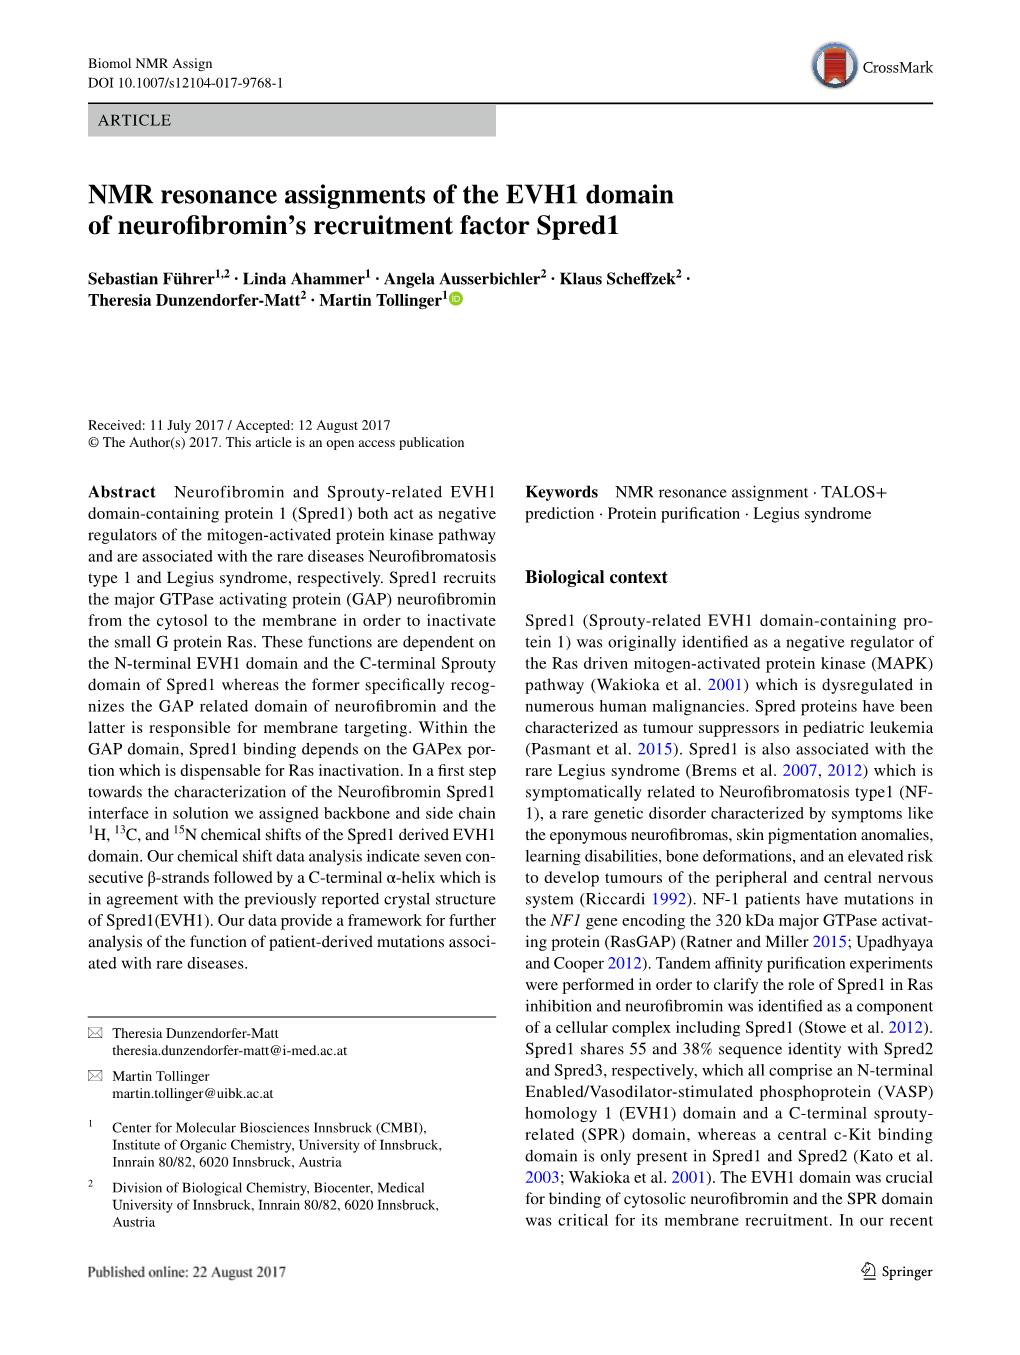 NMR Resonance Assignments of the EVH1 Domain of Neurofibromin's